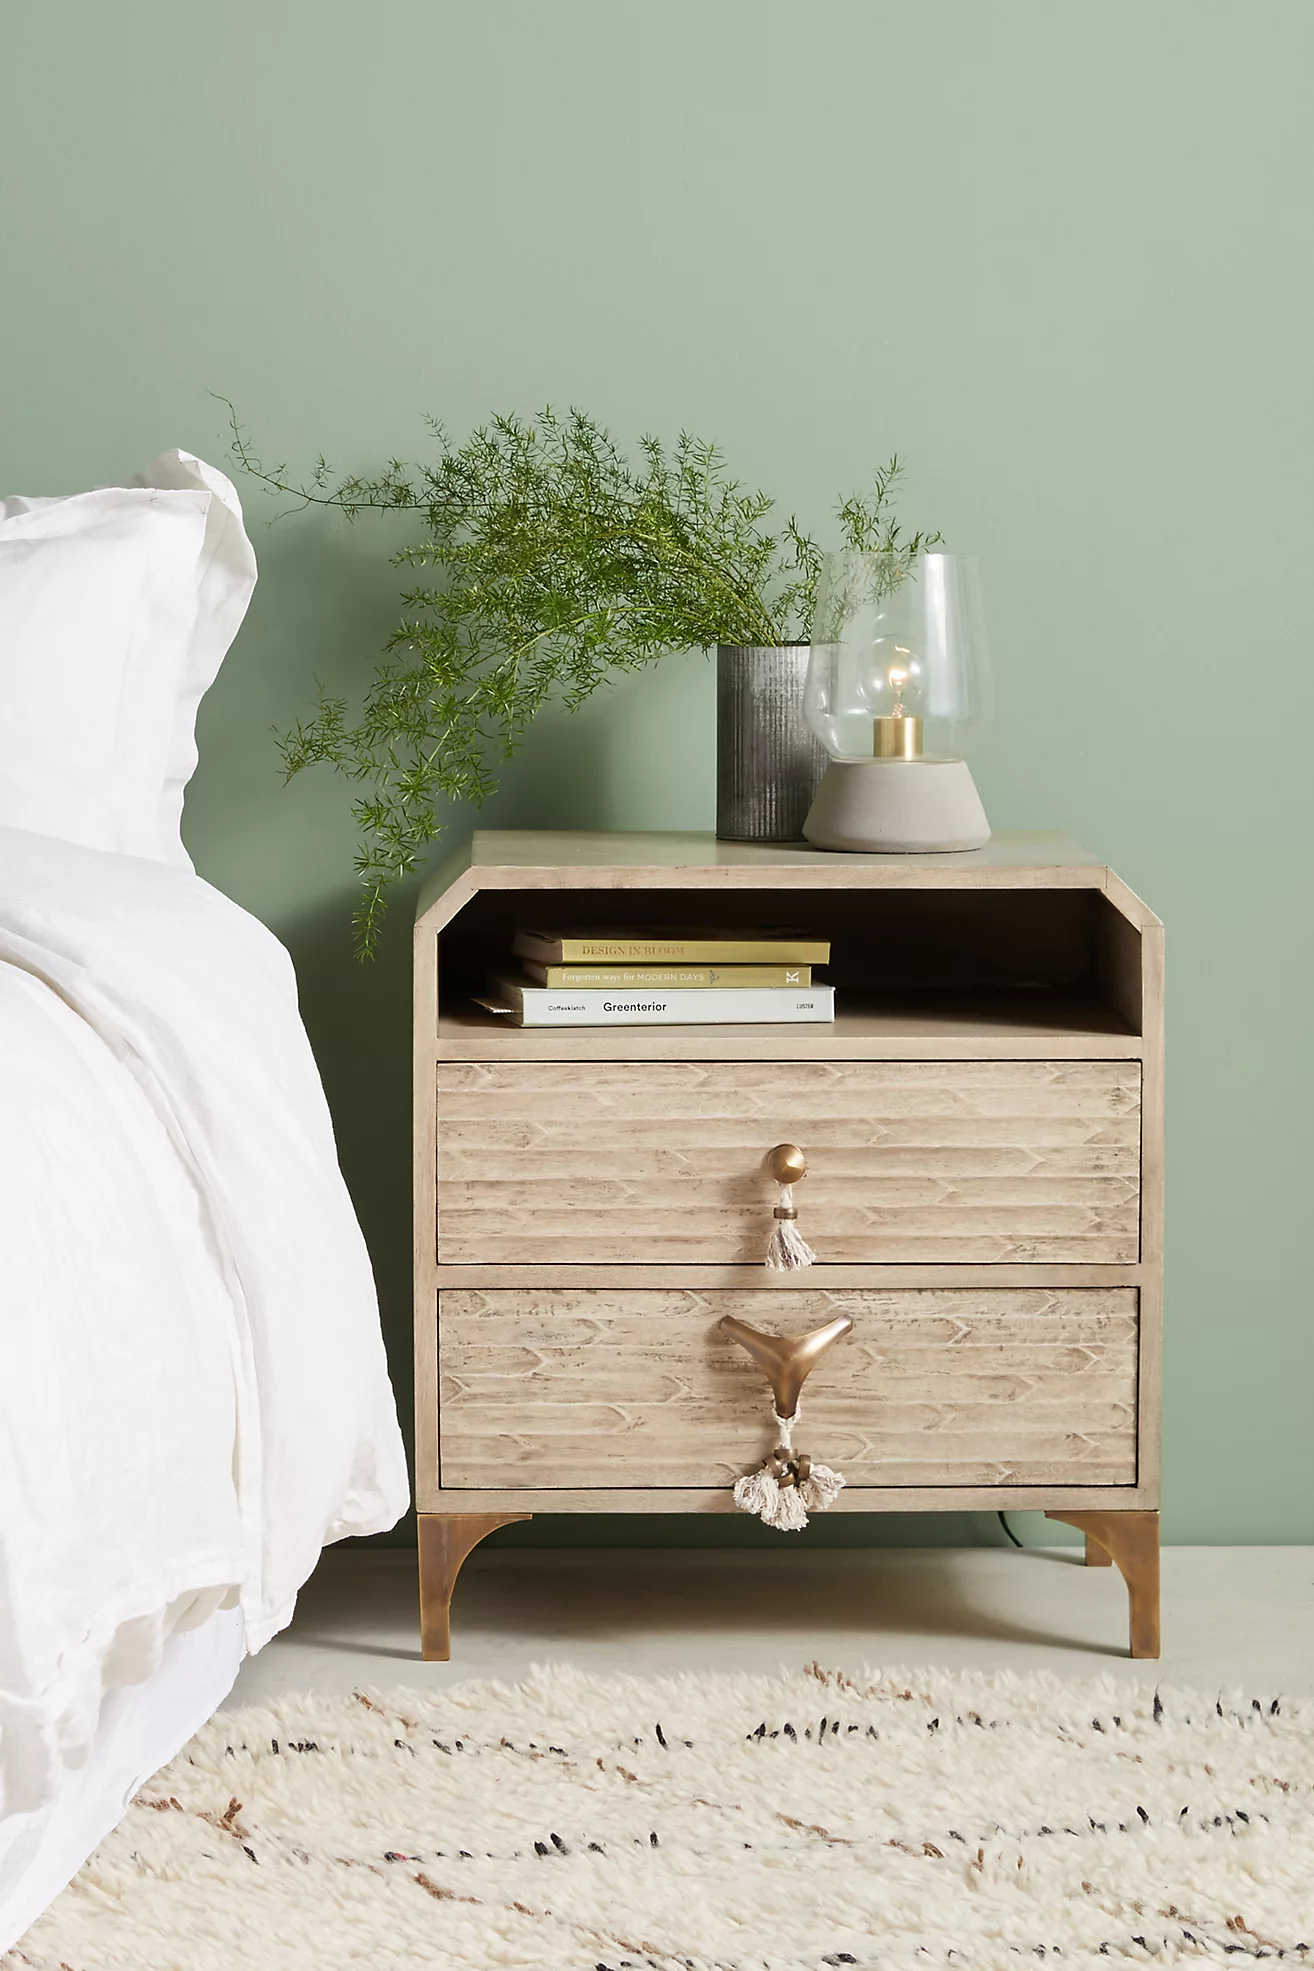 Add Moroccan Vibes with a Tasseled Nightstand